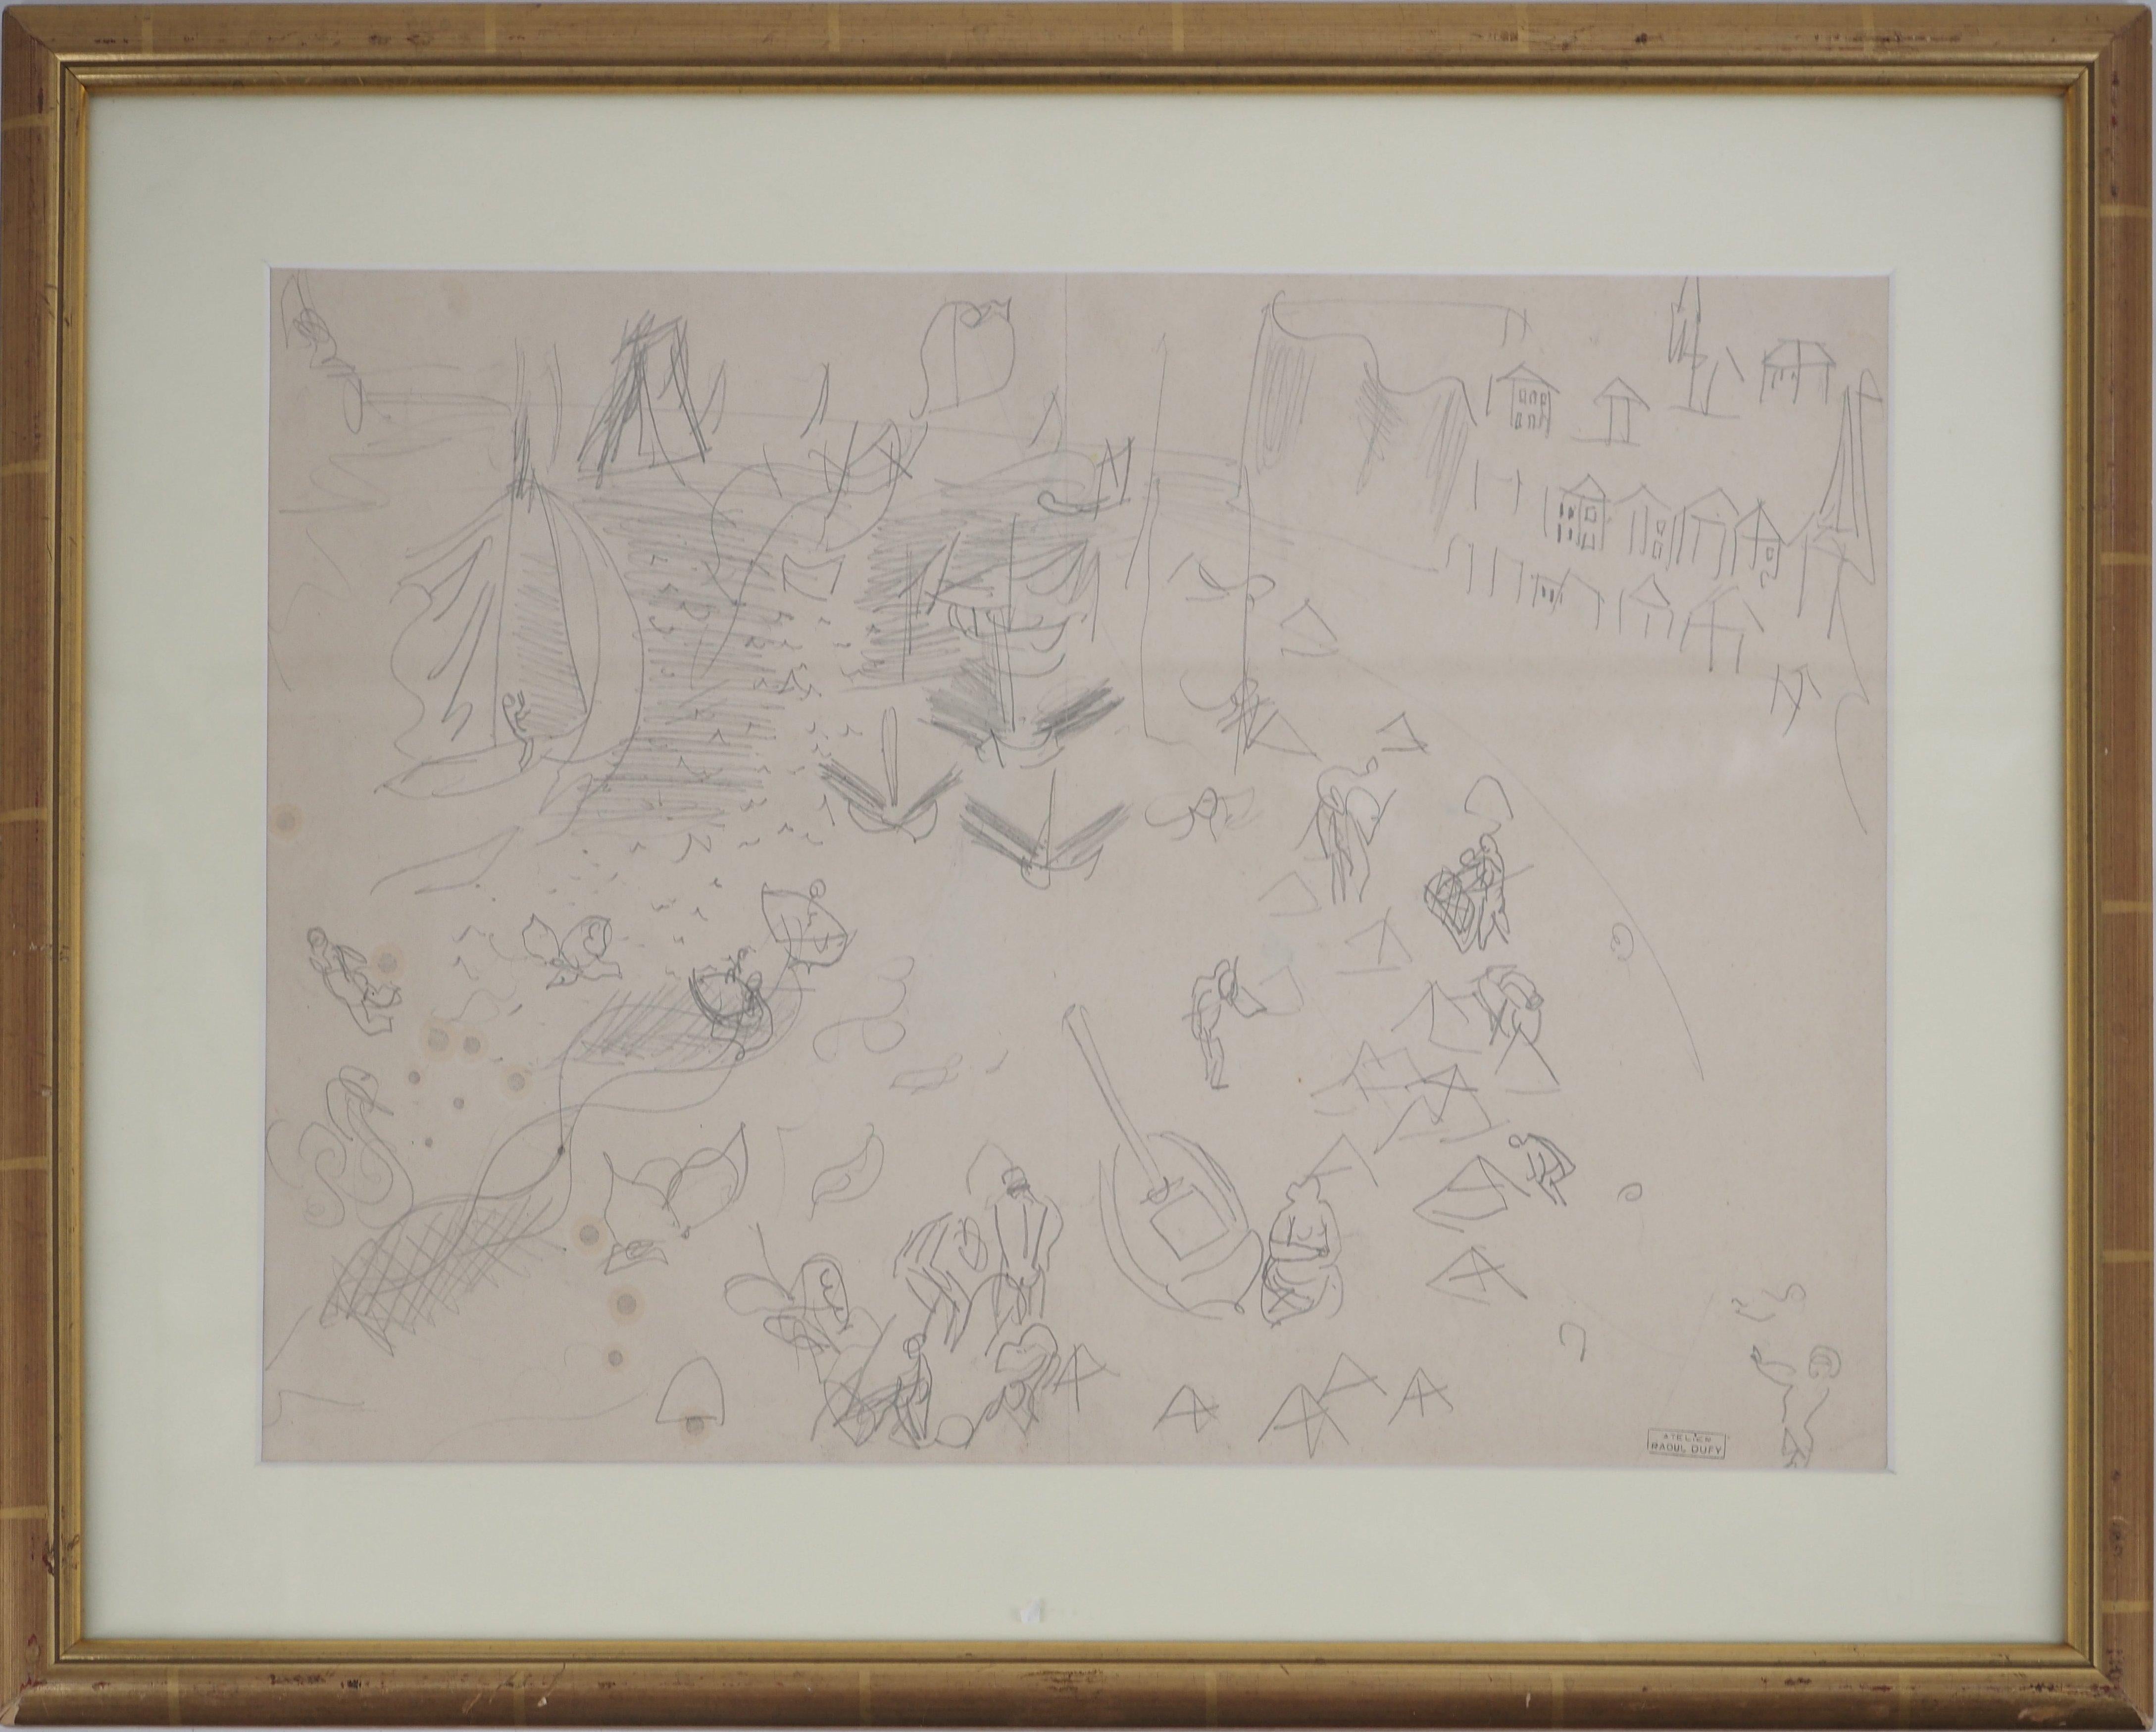 Normandy : Animated Beach and Sailboats - Original Pencil Drawing - Art by Raoul Dufy